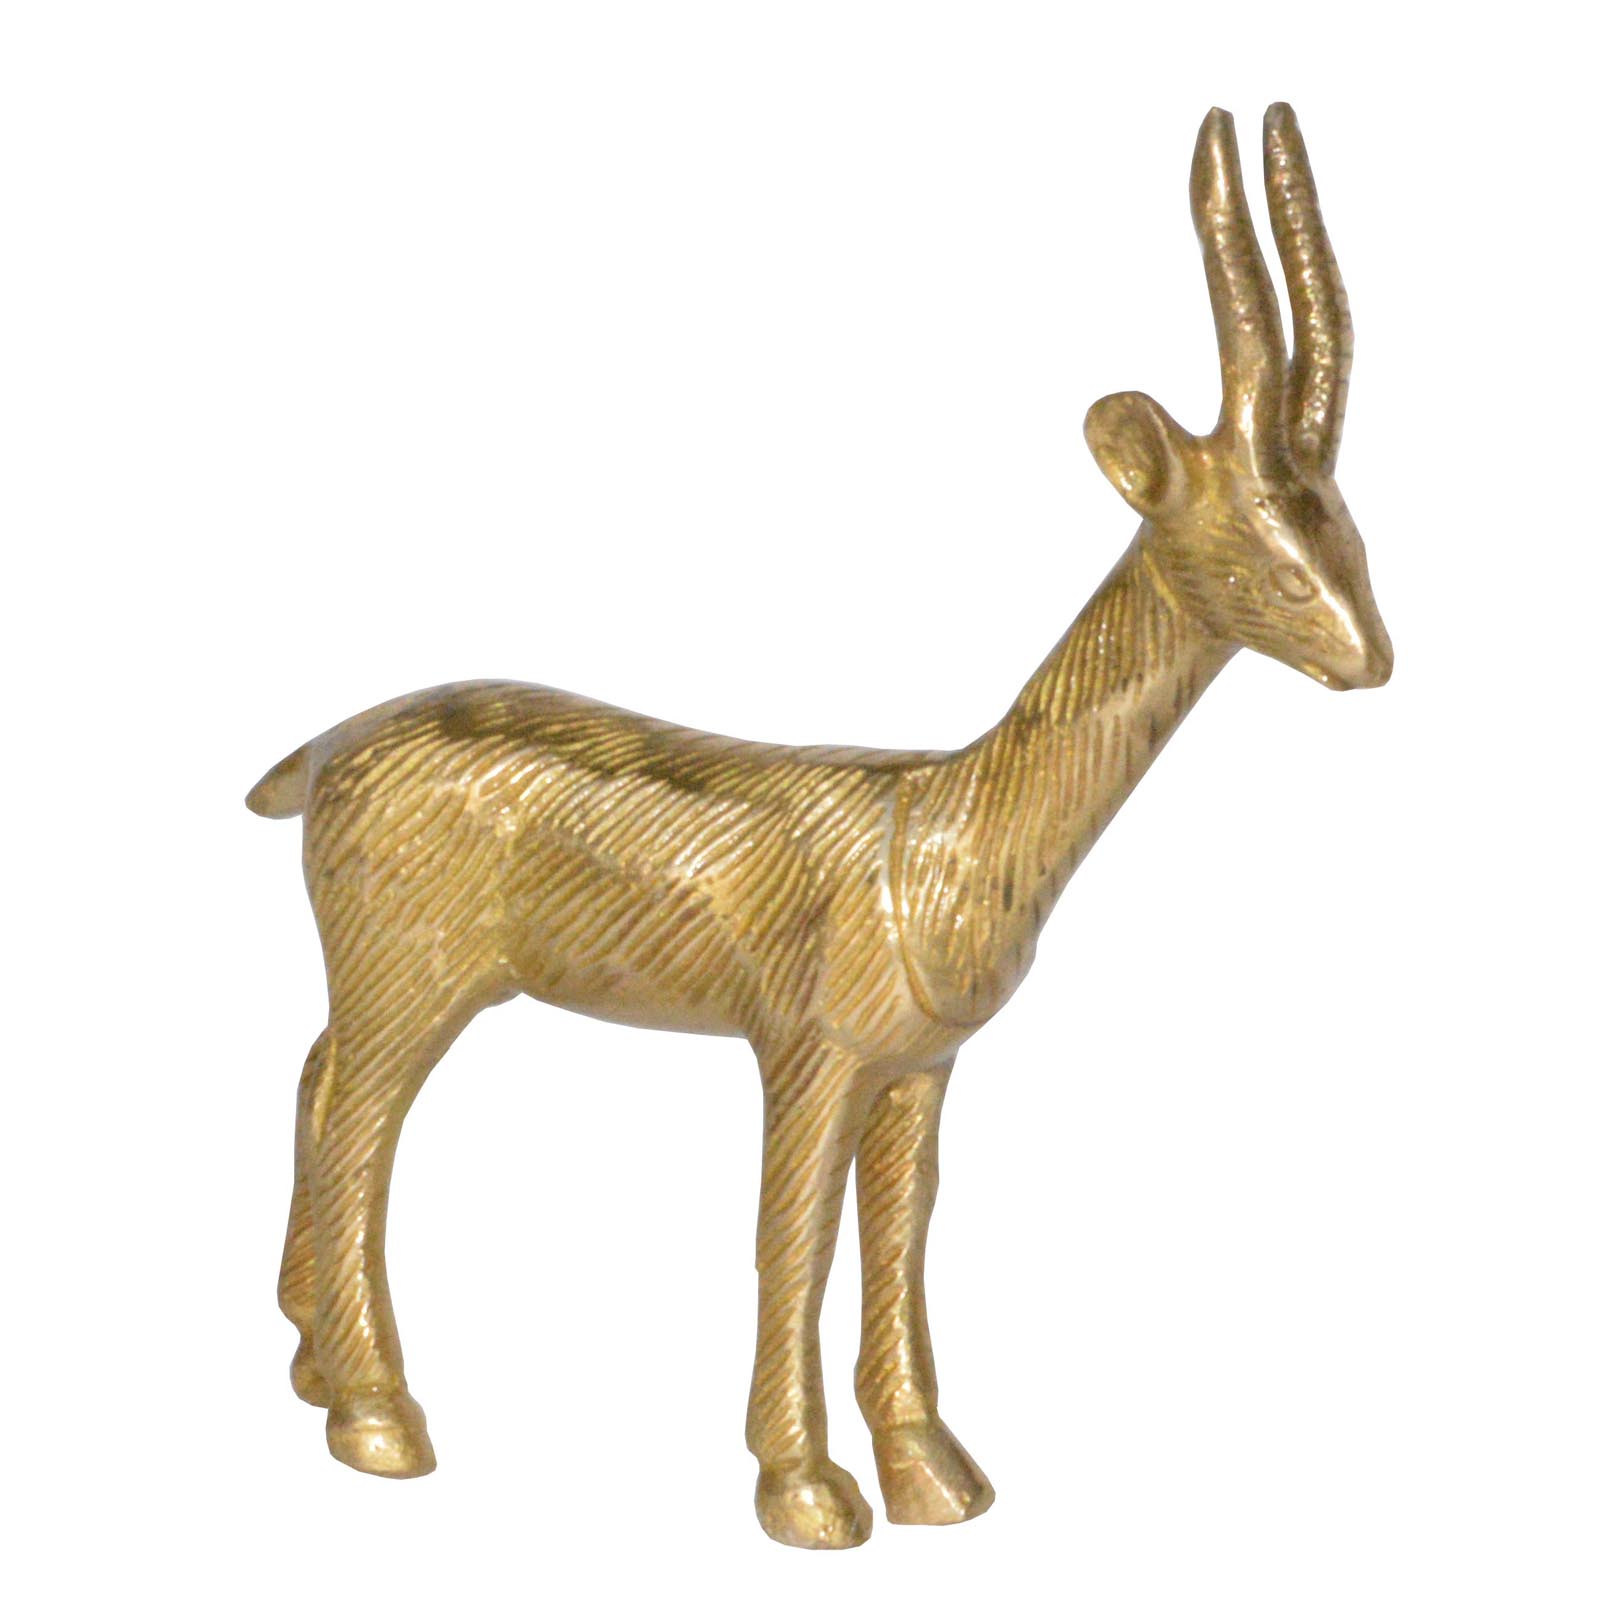 Export quality handmade indian handicraft metal Animal Figurine Brass  Statue of Deer House warming Sculpture Showpiece Table Decor and Gift  figure for all - Buy Animal Figurines Online